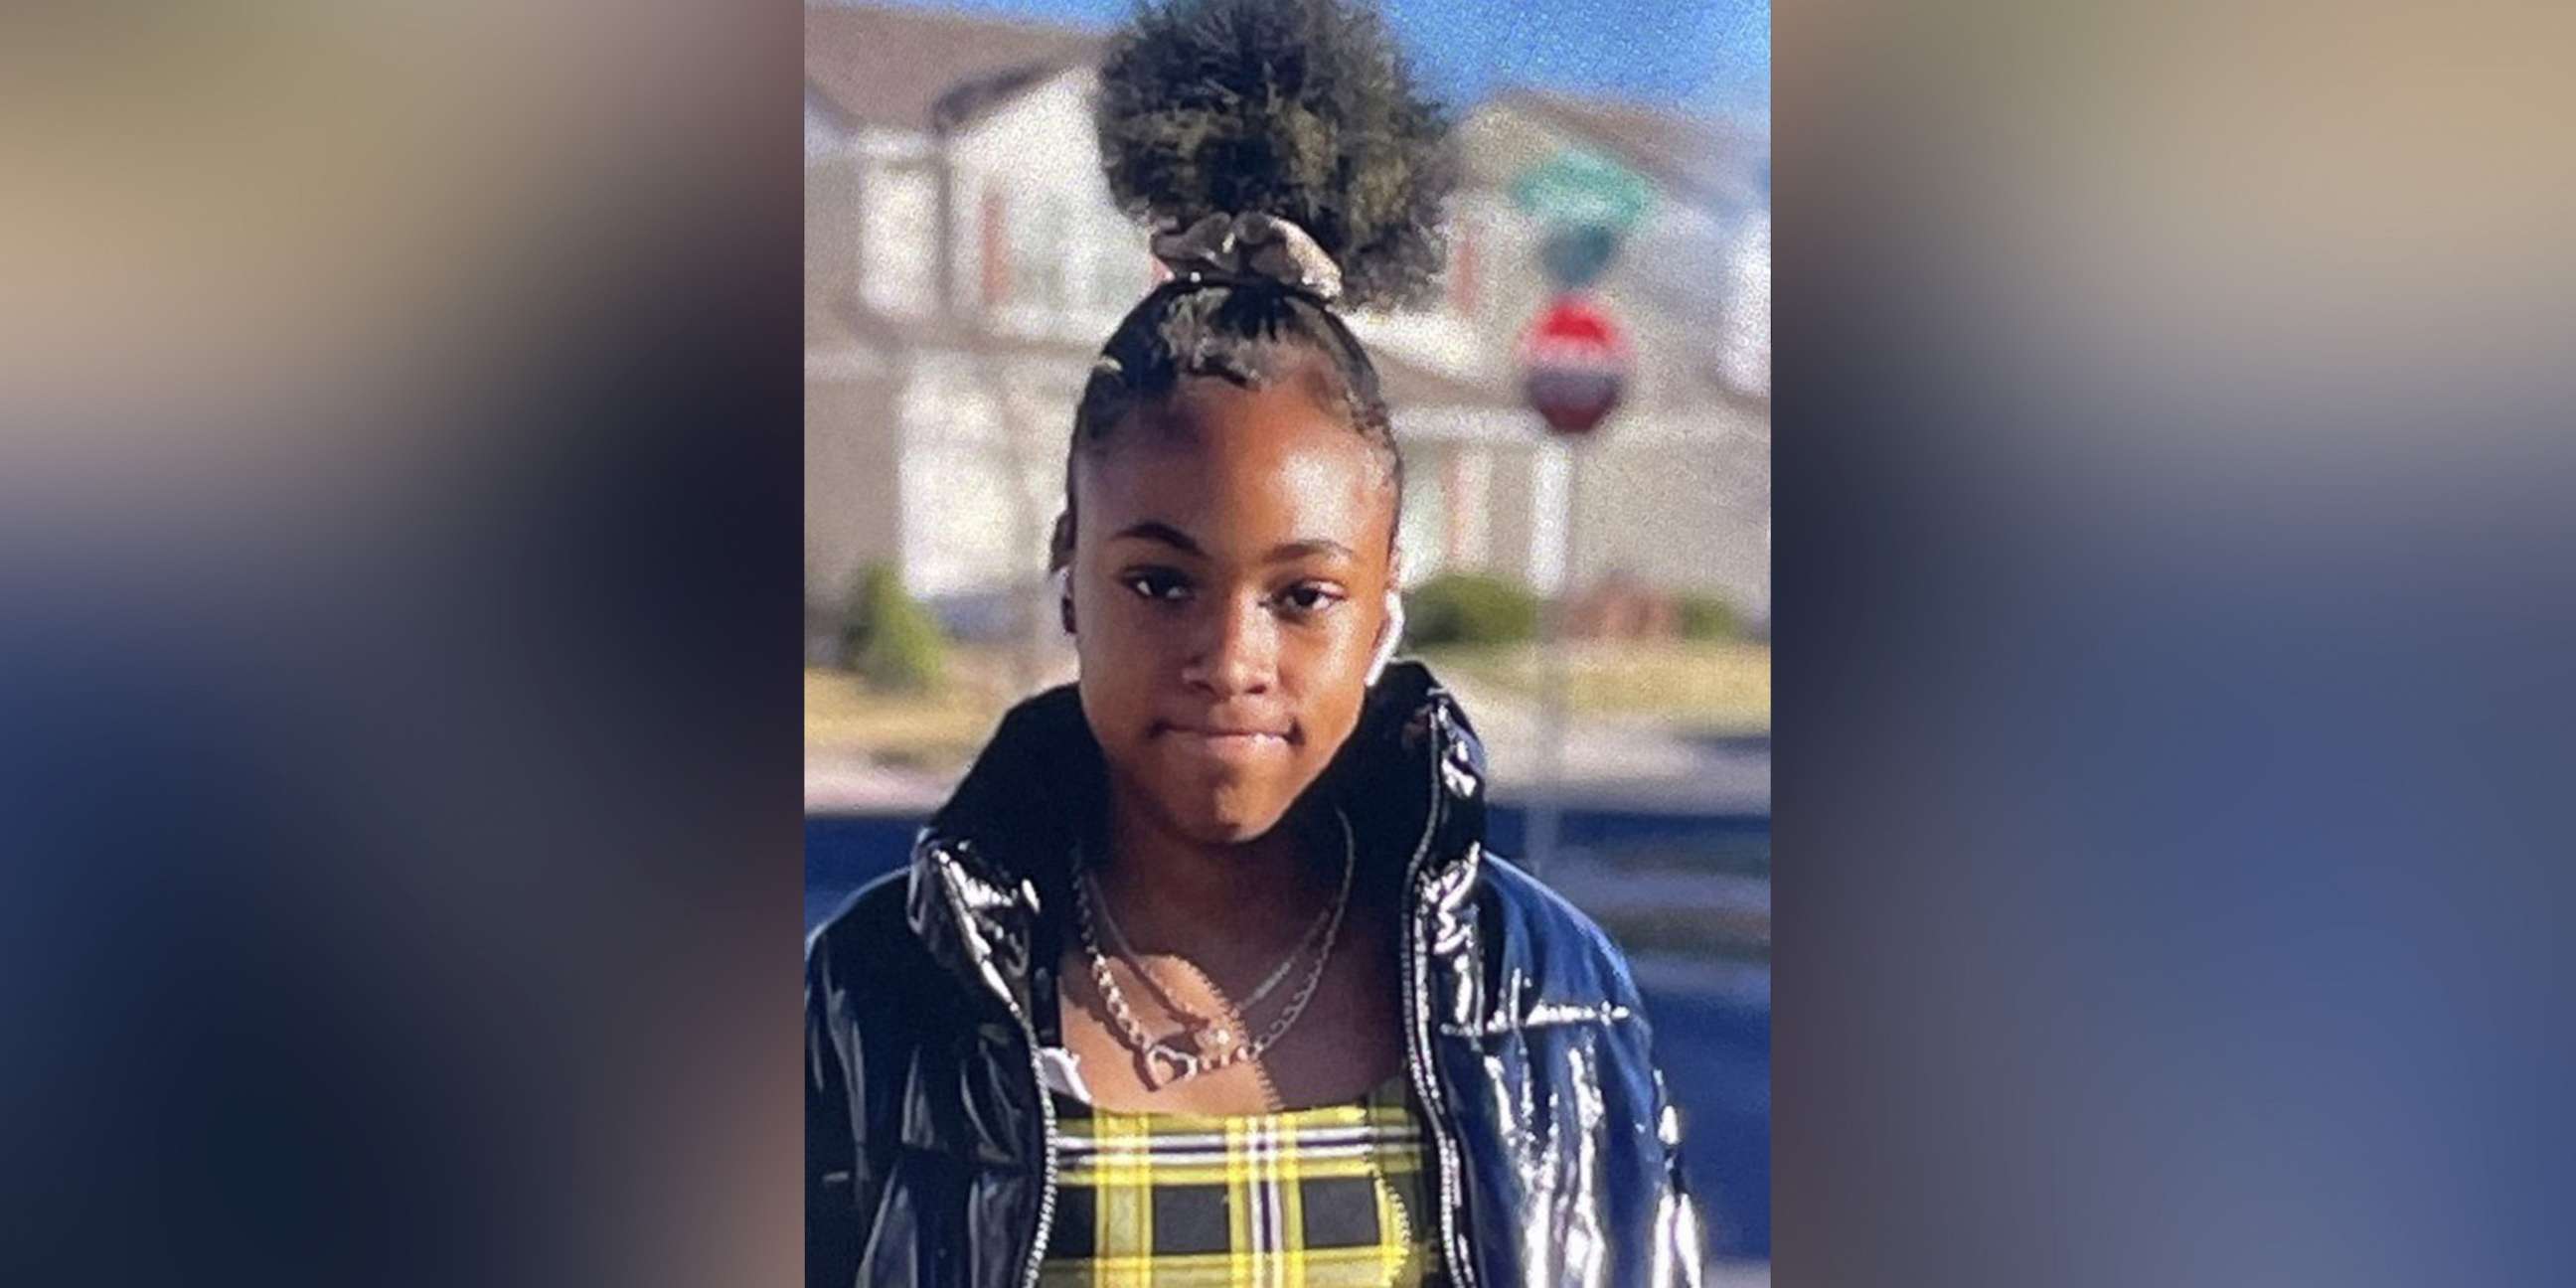 PHOTO: The Aurora (Colo.) Police Department posted this photo of missing 14-year-old Taniya, who left her home in the early morning hours of Jan. 2, 2022.